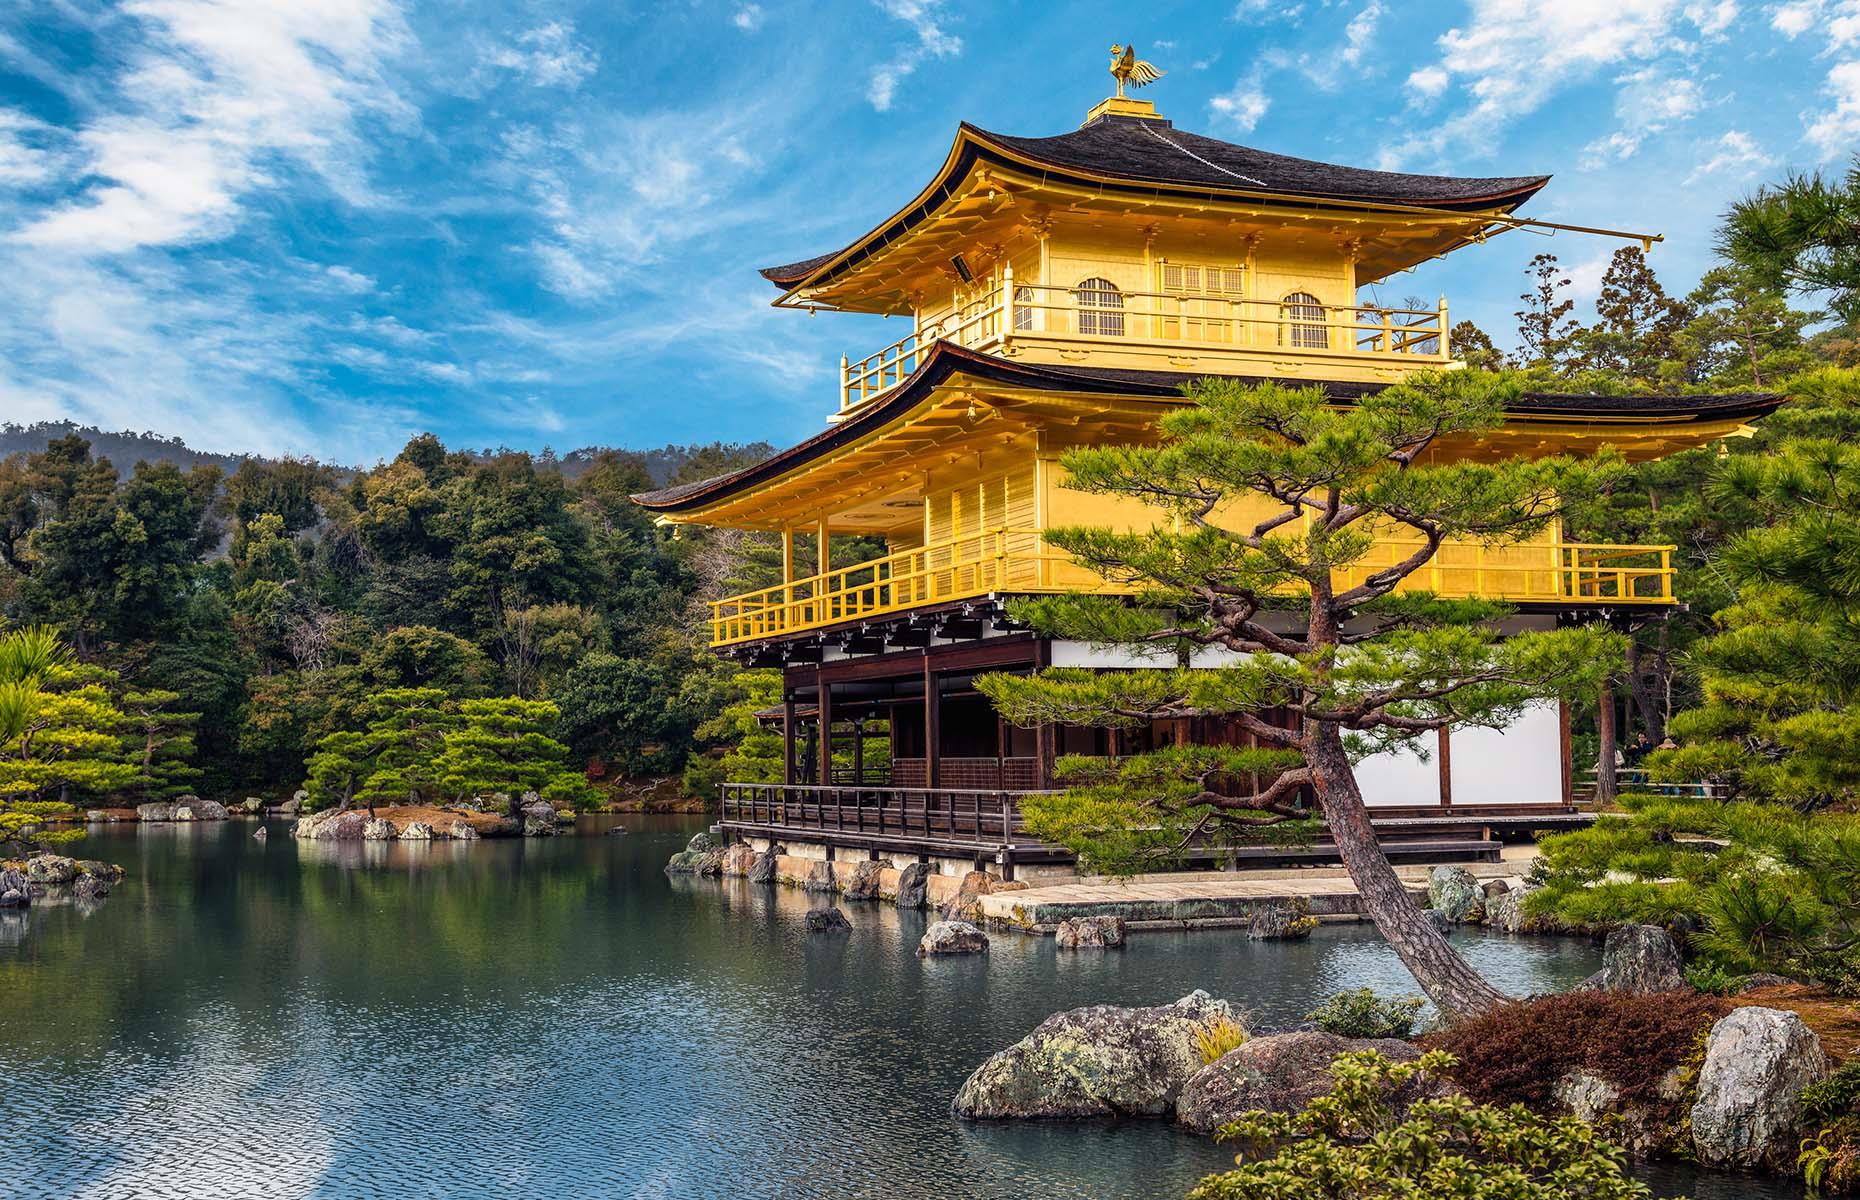 This Zen Buddhist temple is officially named Rokuon-ji, but it’s obvious how it earned its more popular moniker Kinkaku-ji, meaning Golden Temple. The building's warm yellow glow adds to its otherworldly beauty, as does its position at the edge of a mirror pond, giving the tiered structure the appearance of floating on the water. It was built as a rather opulent retirement villa for shogun (military dictator) Ashikaga Yoshimitsu in 1397 and became a temple following his death in 1408.